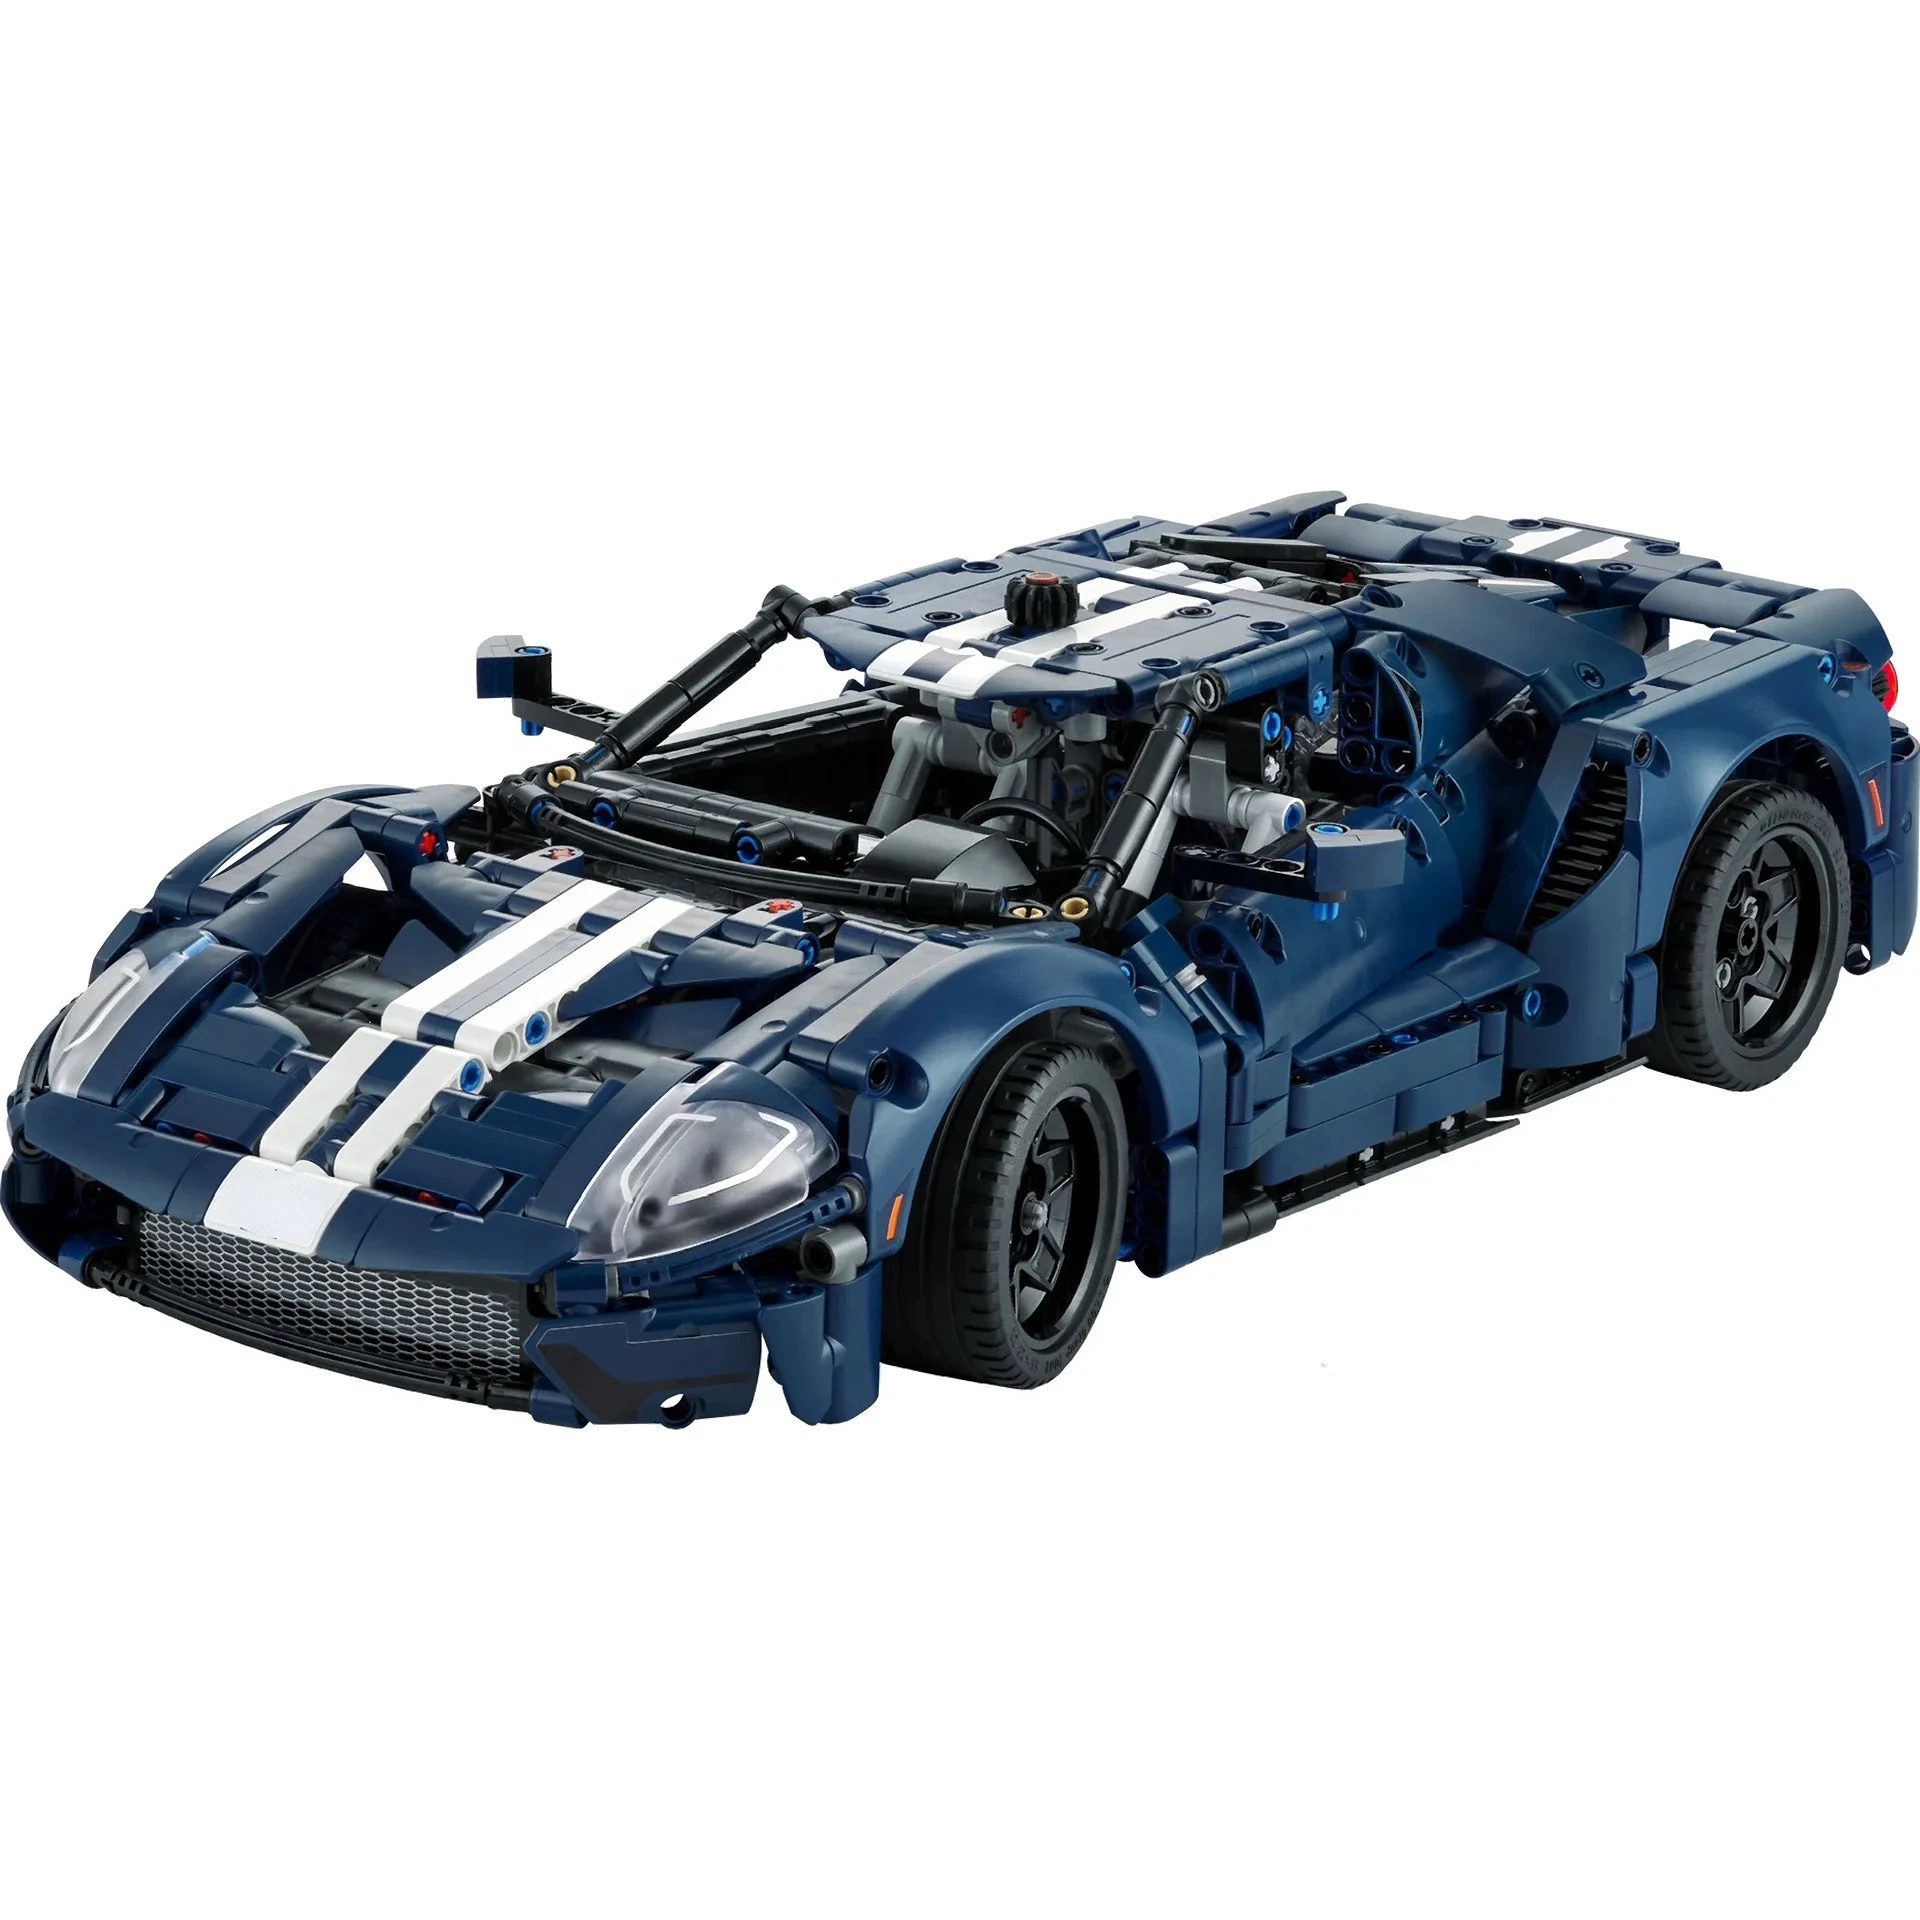 

1466PCS Technical 2022 Forded GT Supercar Model 42154 Building Block Toy Vehicle Bricks Birthday Gifts For Boyfriend Adult